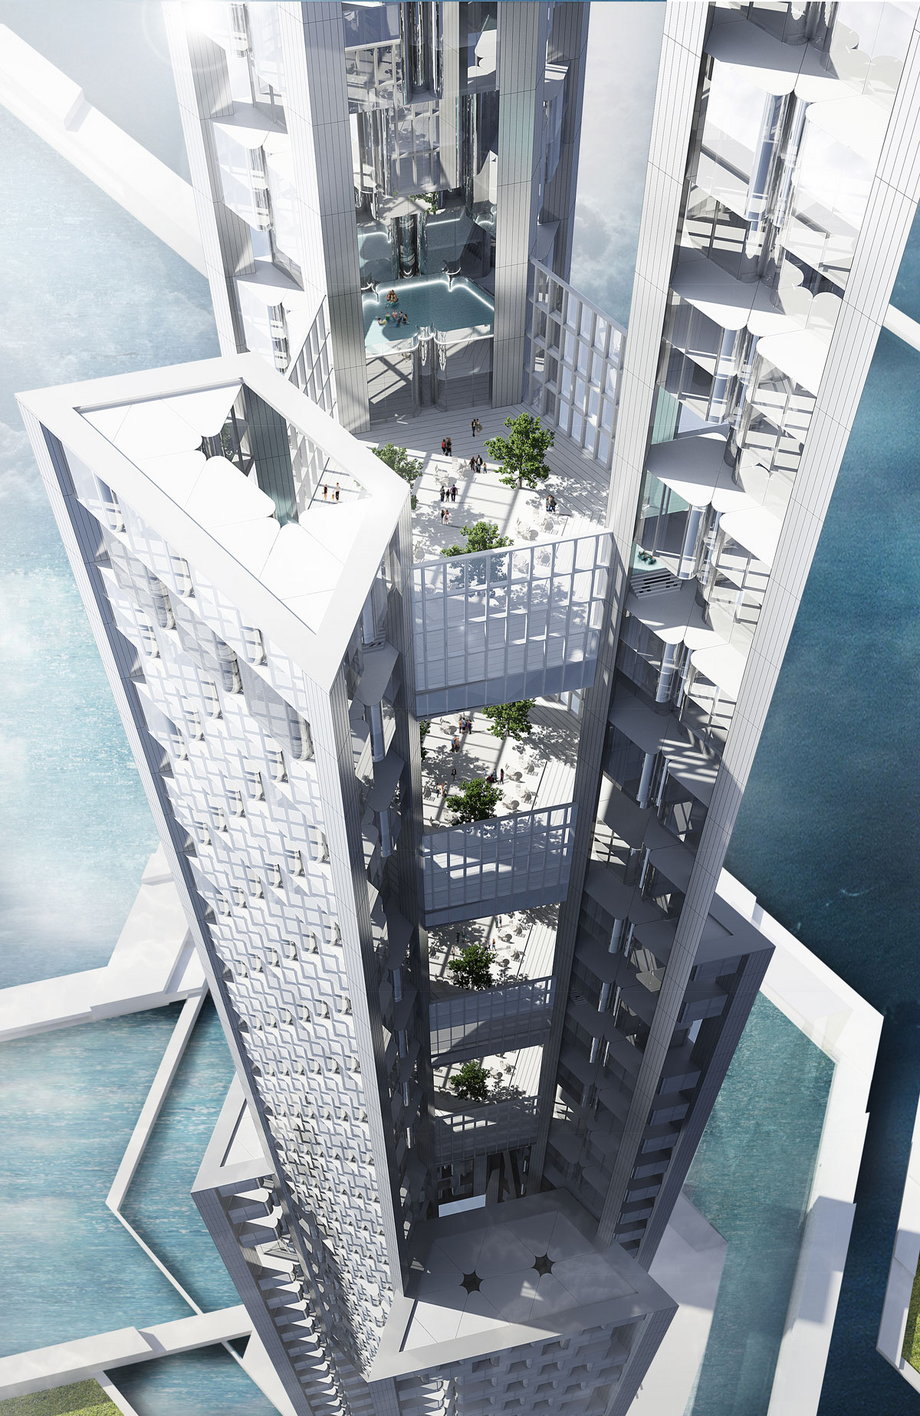 A vertical network of residential communities would be linked together by multi-level sky lobbies. From here, residents could access shared amenities like shops, restaurants, hotels, gyms, libraries, and clinics within the building.